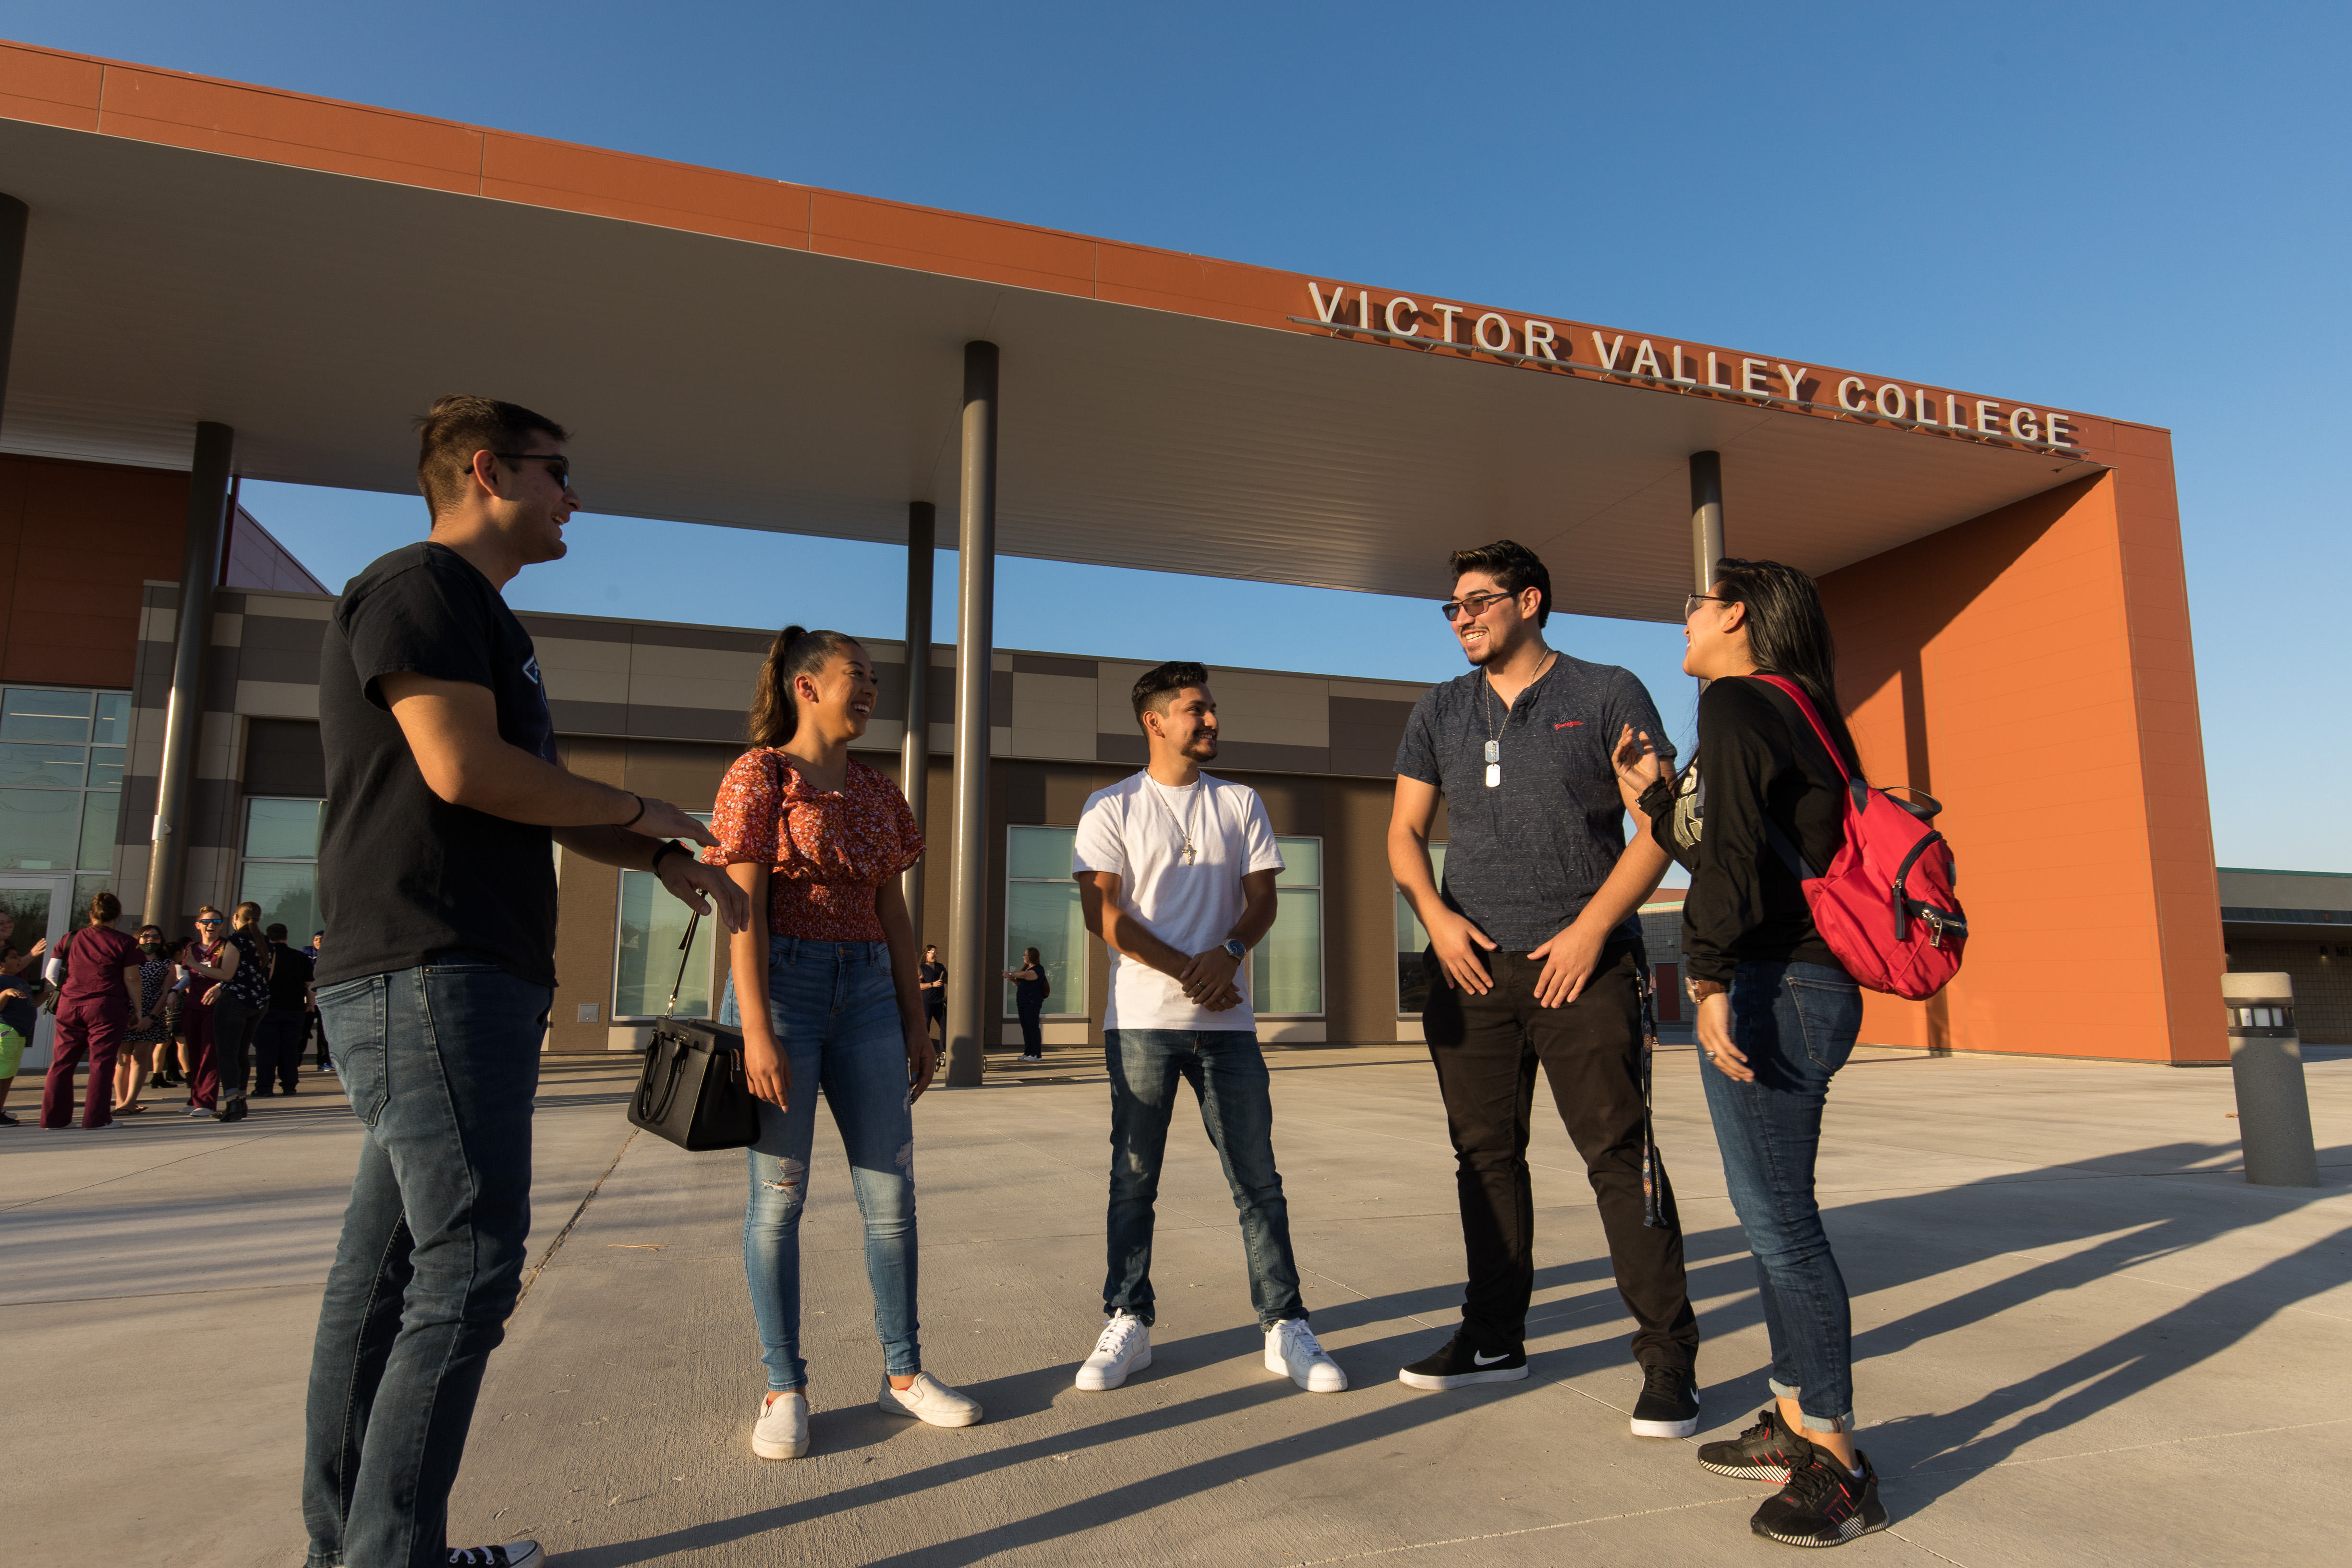 Five students having a discussion in front of a building on the VVC campus.